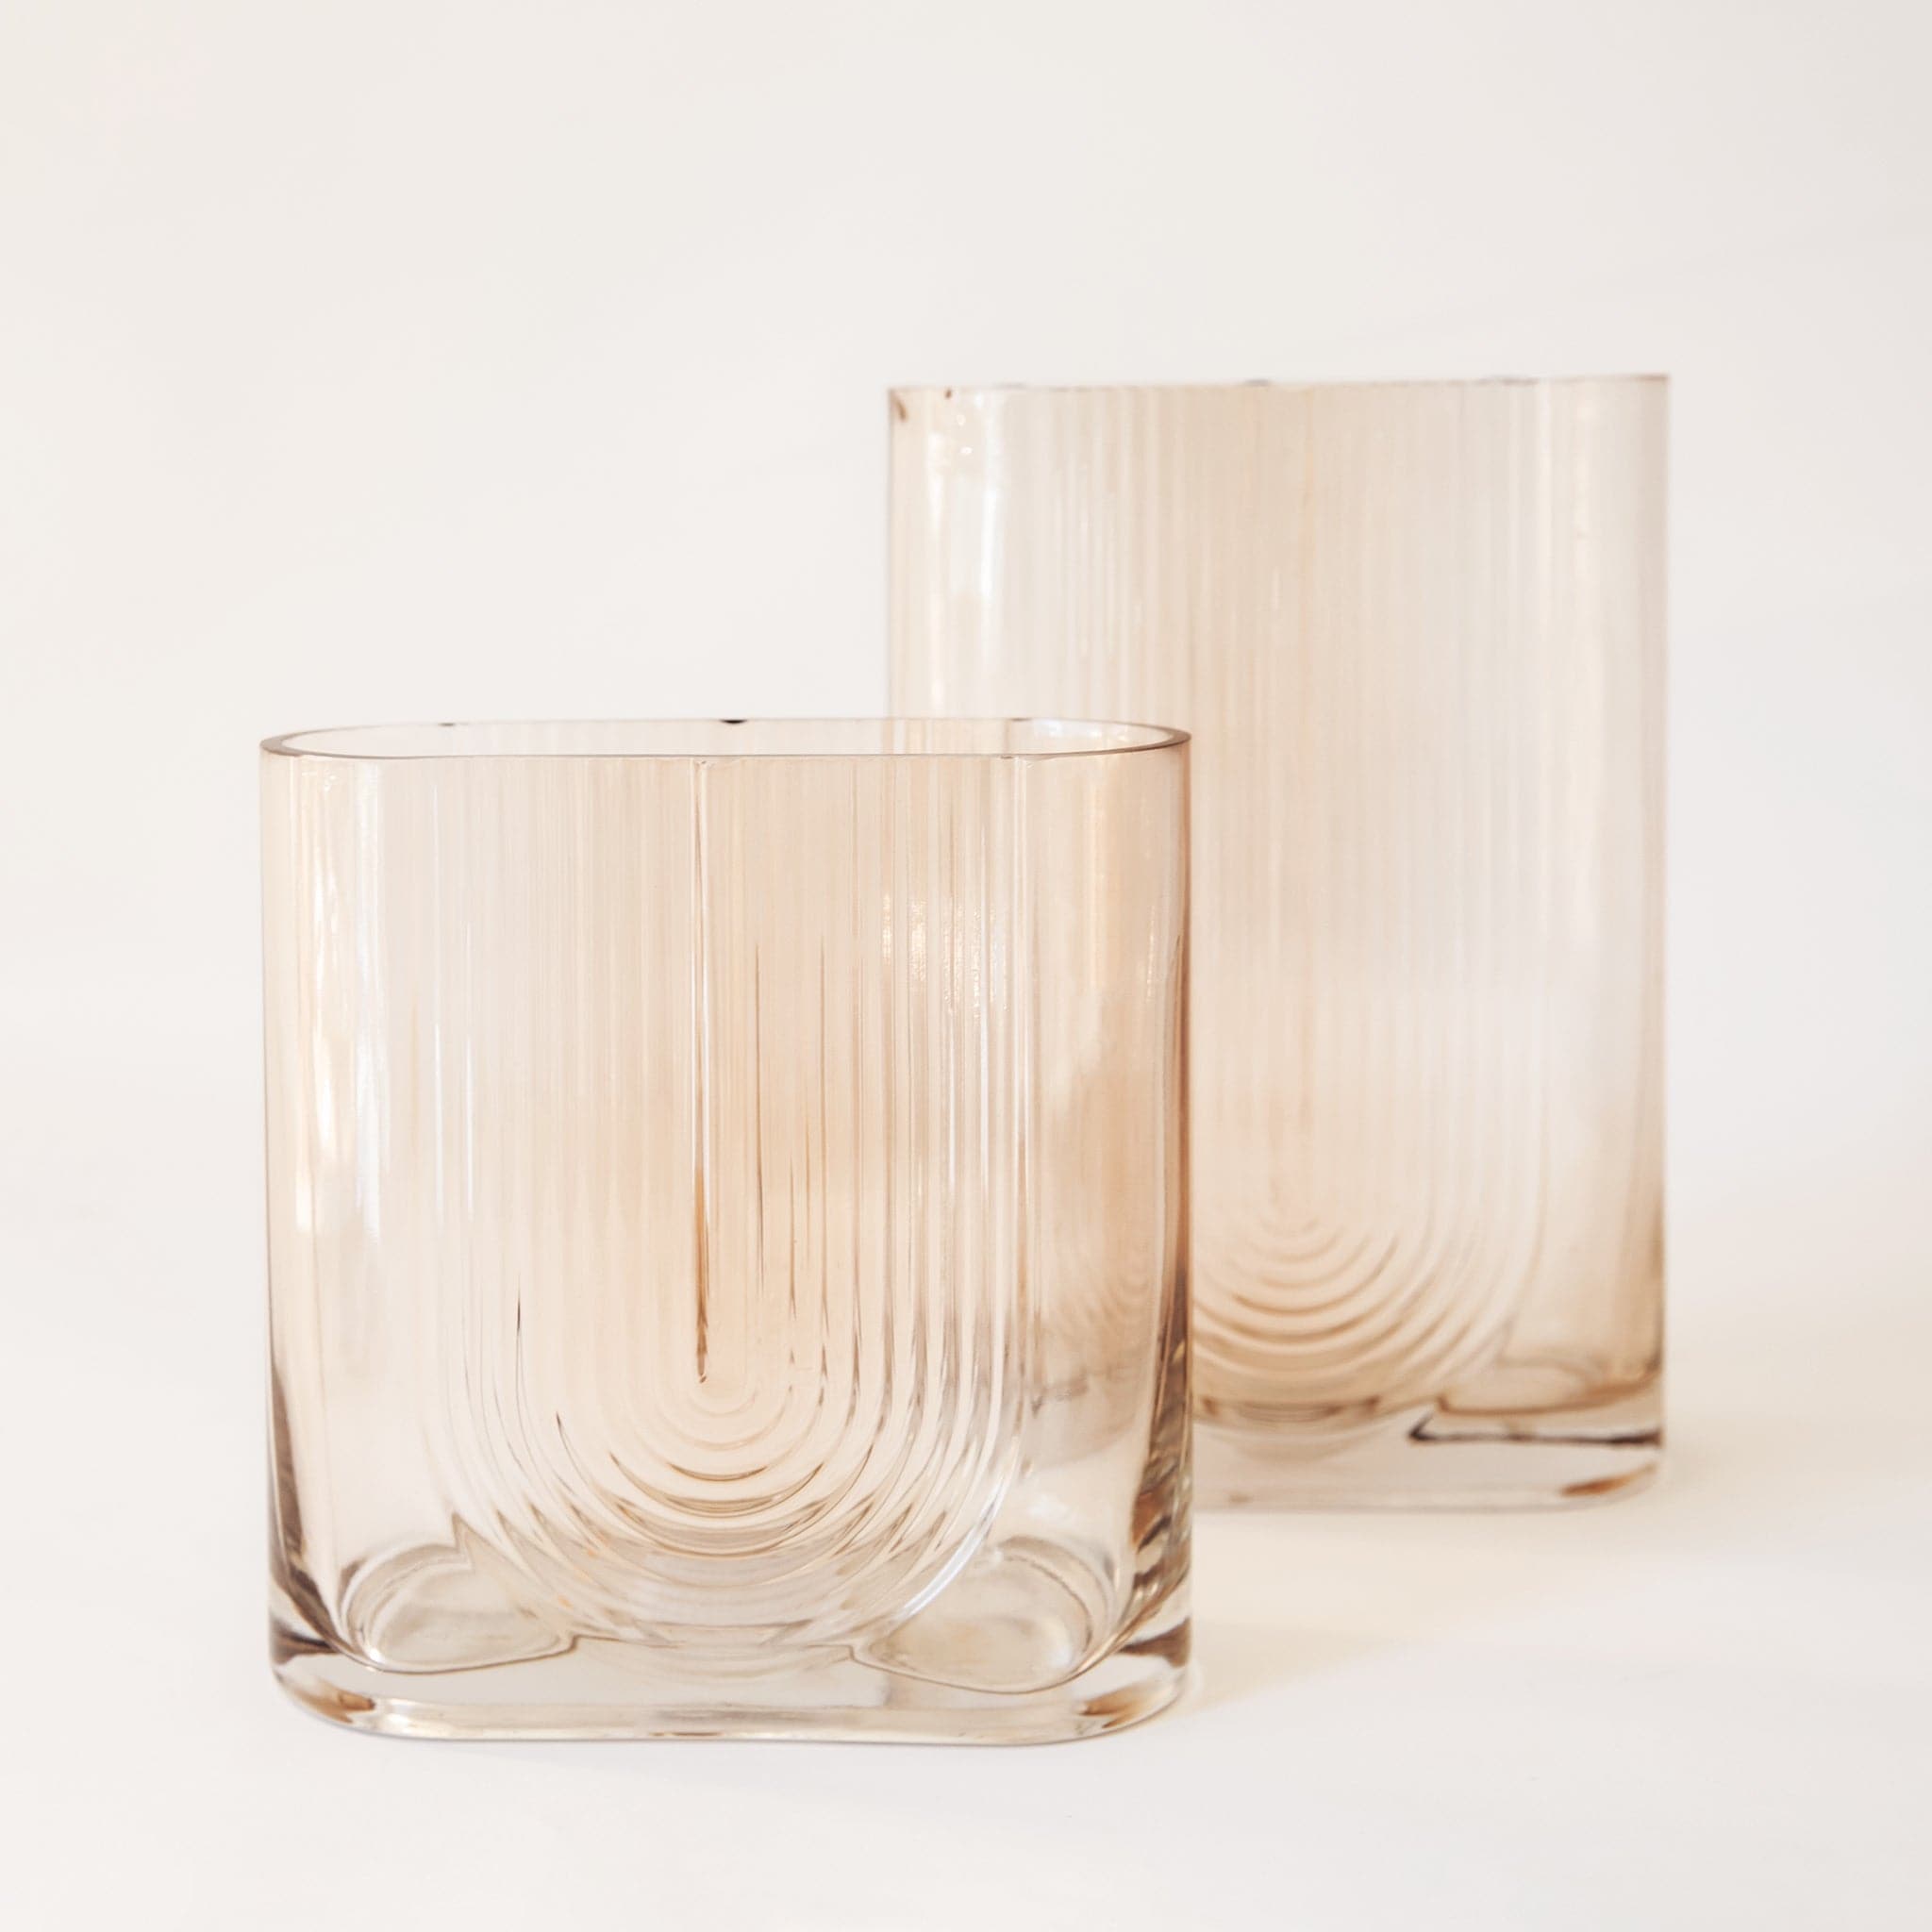 The morena vase in small and large alone. The morena vase has a unique shape. It is made from glass and has an oblong opening. The body of the vase is tall and angular resembling a square or rectangle, but with a pill-shaped opening the same width as the vase. There is a design on the front resembling a boho, upside-down rainbow design.